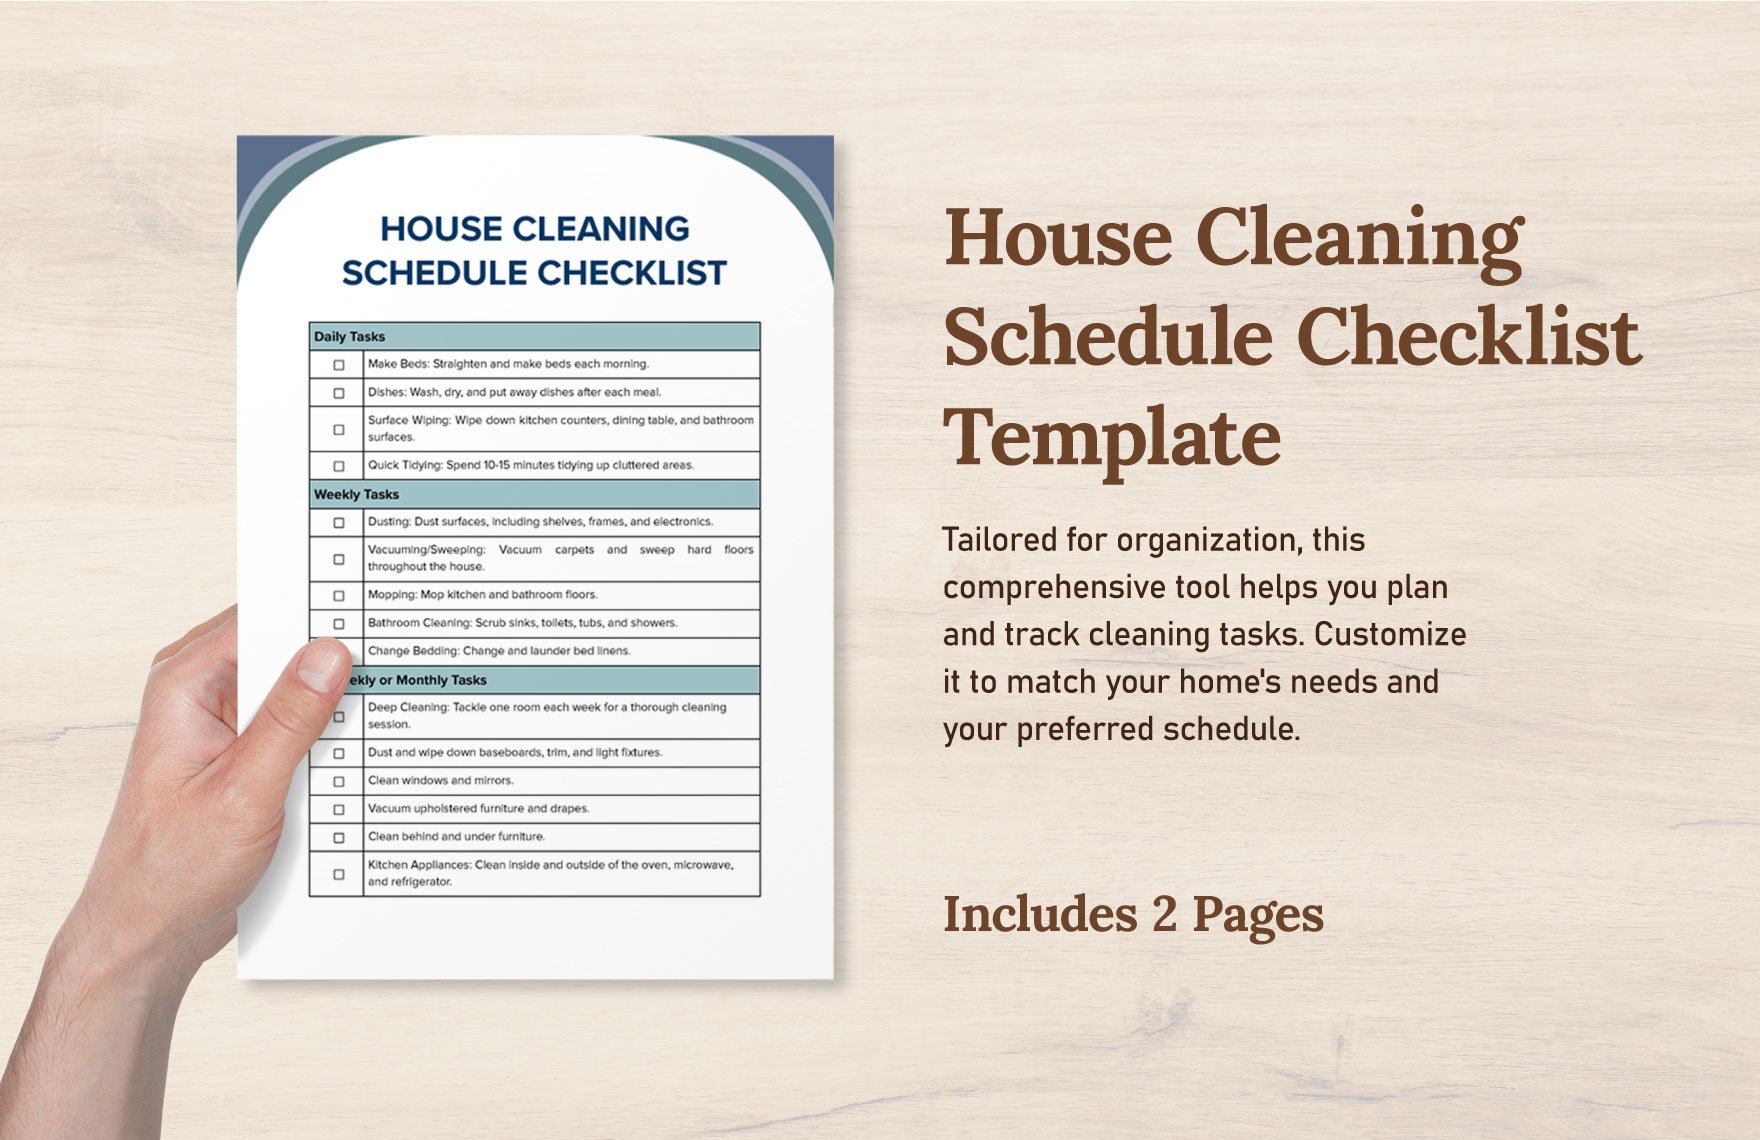 House Cleaning Schedule Checklist Template